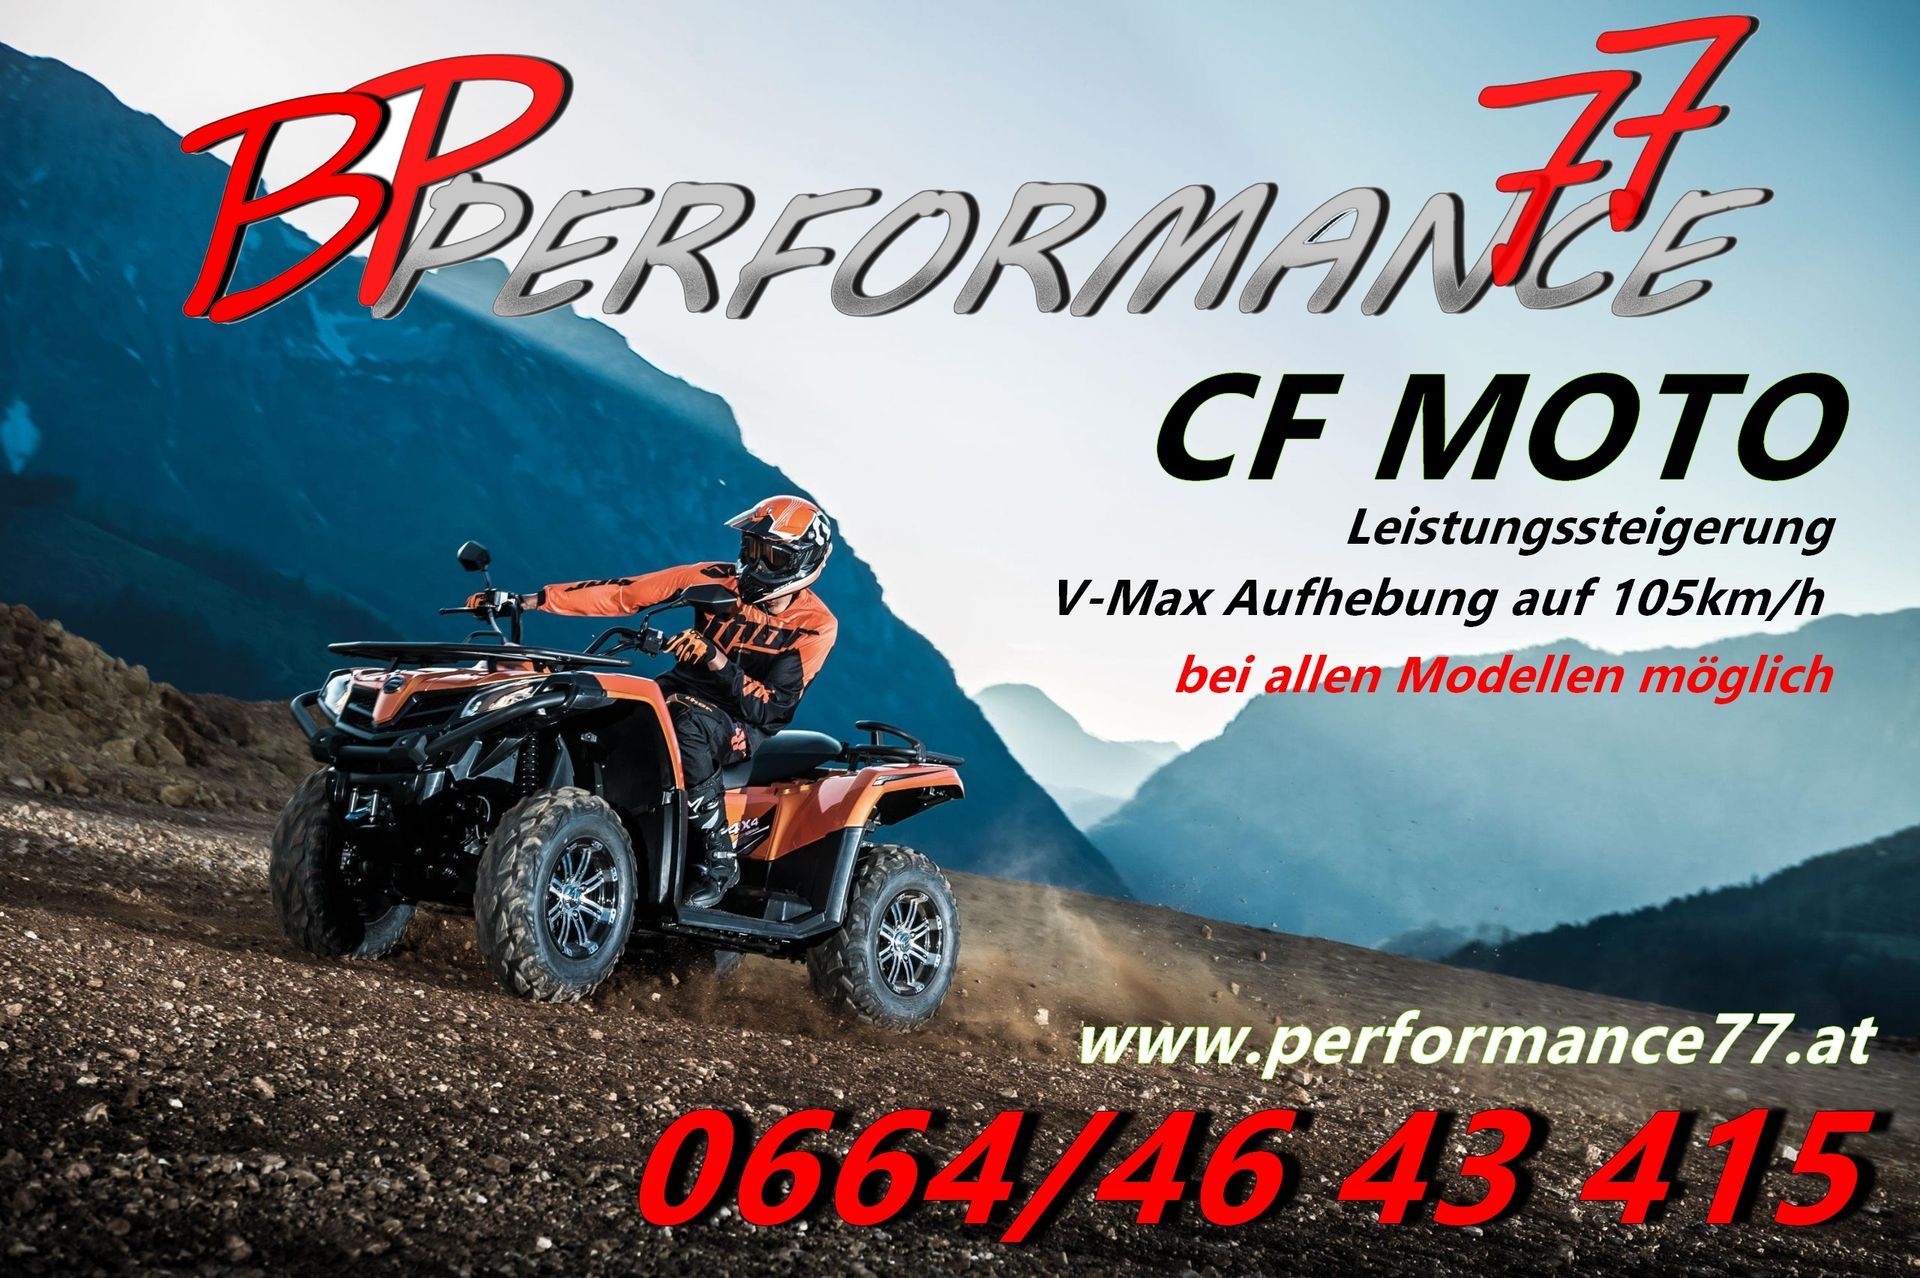 CF MOTO_CForce_Leistungssteigerung_Softwareoptimierung_Geschwindigkeitsanhebung_Vmax_Chiptuning_BP Performance77_BPTuning_ATV_Österreich_Ken
BP Performance77 Chiptuning Softwaretuning Eco TuningAdBlue off Deaktivieren, Dieselpartikelfilter Deaktivieren, Abgasrückführung Deaktivierenm File Service, Fileserver, File Server, Nox Sensor deaktivierung, 
PKW
LKW
Traktor
Agrar
Quad
Quad ATV
CF Moto
ECU clone
TCU clone
Chiptuning
Stage1-stage4
Vmax off
Adblue and SCR off
DPF OFF
Flaps OFF
popbangs
gearbox data to adjust LC
sport display
immo off
dpf off
dtc off
GPF/OPF Removal
DPF Removal
EGR Removal
DTC Removal
ADBlue Removal
HOT Start Fix
IMMO Removal
Readiness Calibration
Flaps / Swirl Removal
TVA Removal
Sport Displays Calibration
Cold Start Noise Reduction
Kickdown Deactivation
StartStop Disable
MAF Removal
Speed Limiter Removal
Torque Monitoring Disable
Burbles Activation
Popcorn Activation
EVAP Removal
Exhaust Flap Removal
SAP Removal
AGS Removal
BMS/BPCM
Lambda/O2 Removal
Launch Control
OBD Reading Protection
Boost Sensor Calibration
LC, AL and NLS for MED9.1
Checksum Fix
vmax, swirl off
restoring ECU or TCU factory setting service
VIN fix (EEPROM support checksum